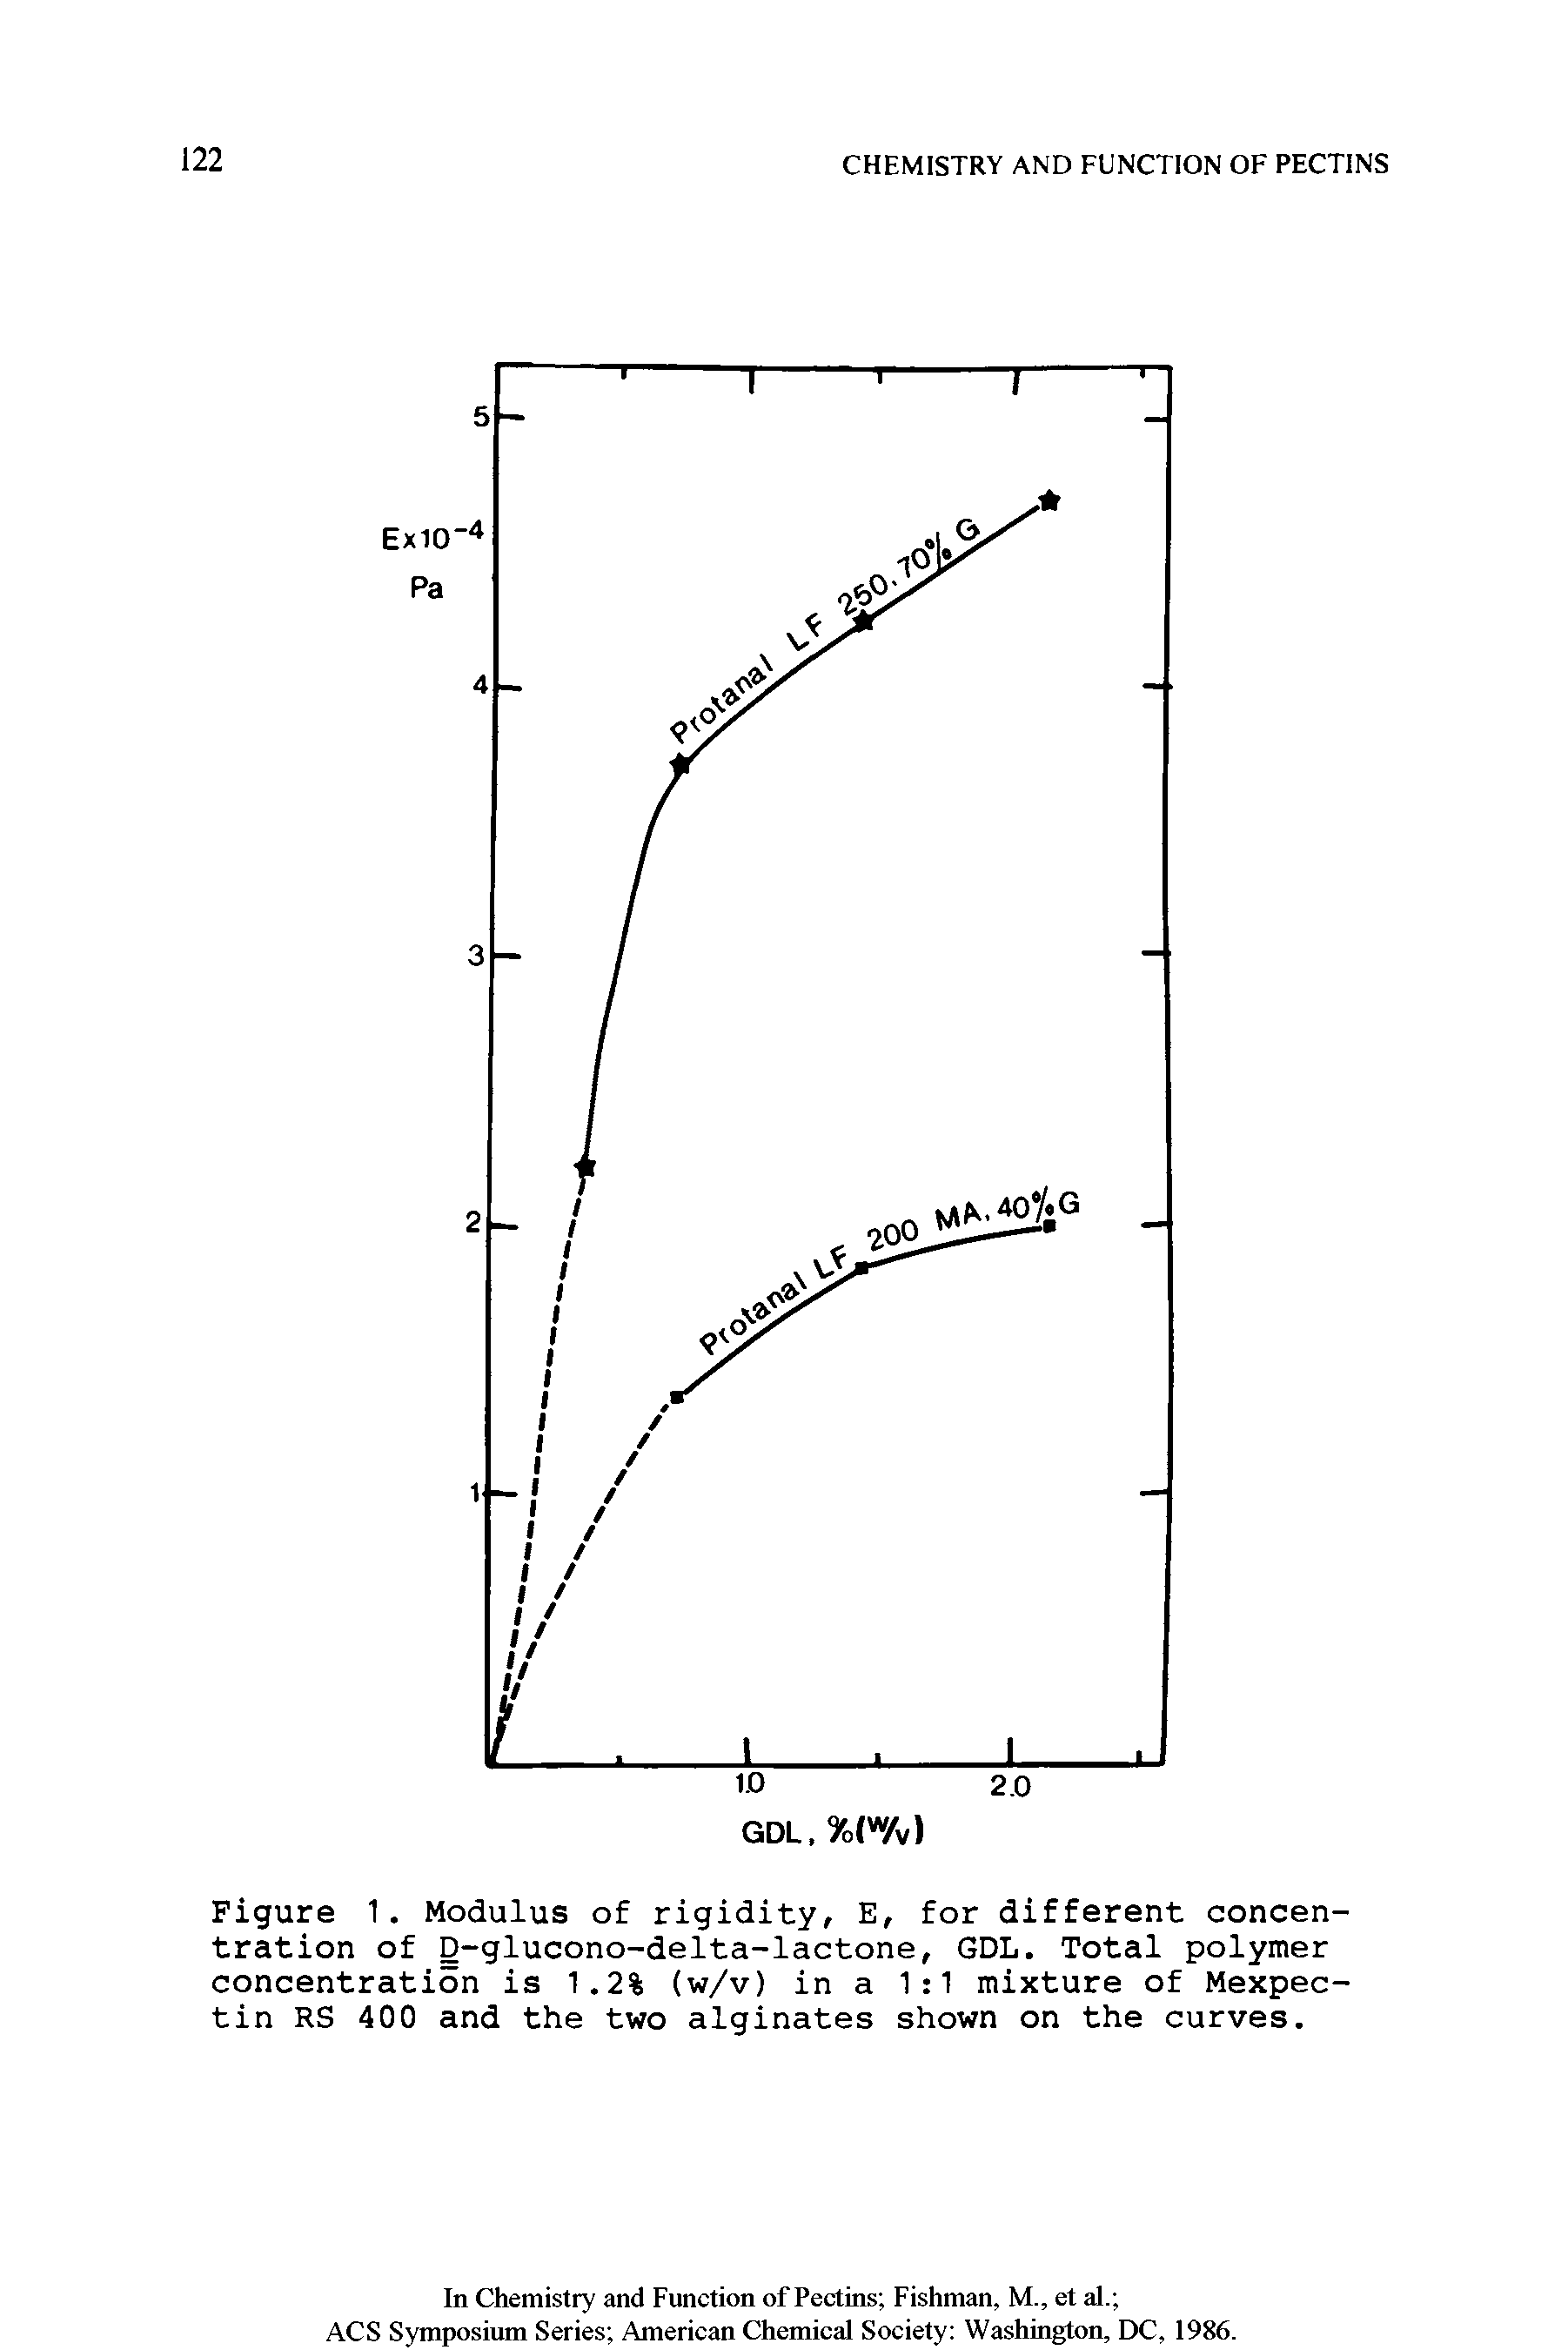 Figure 1, Modulus of rigidity, E, for different concentration of g-glucono-delta-lactone, GDL. Total polymer concentration is 1.2% (w/v) in a 1 1 mixture of Mexpec-tin RS 400 and the two alginates shown on the curves.